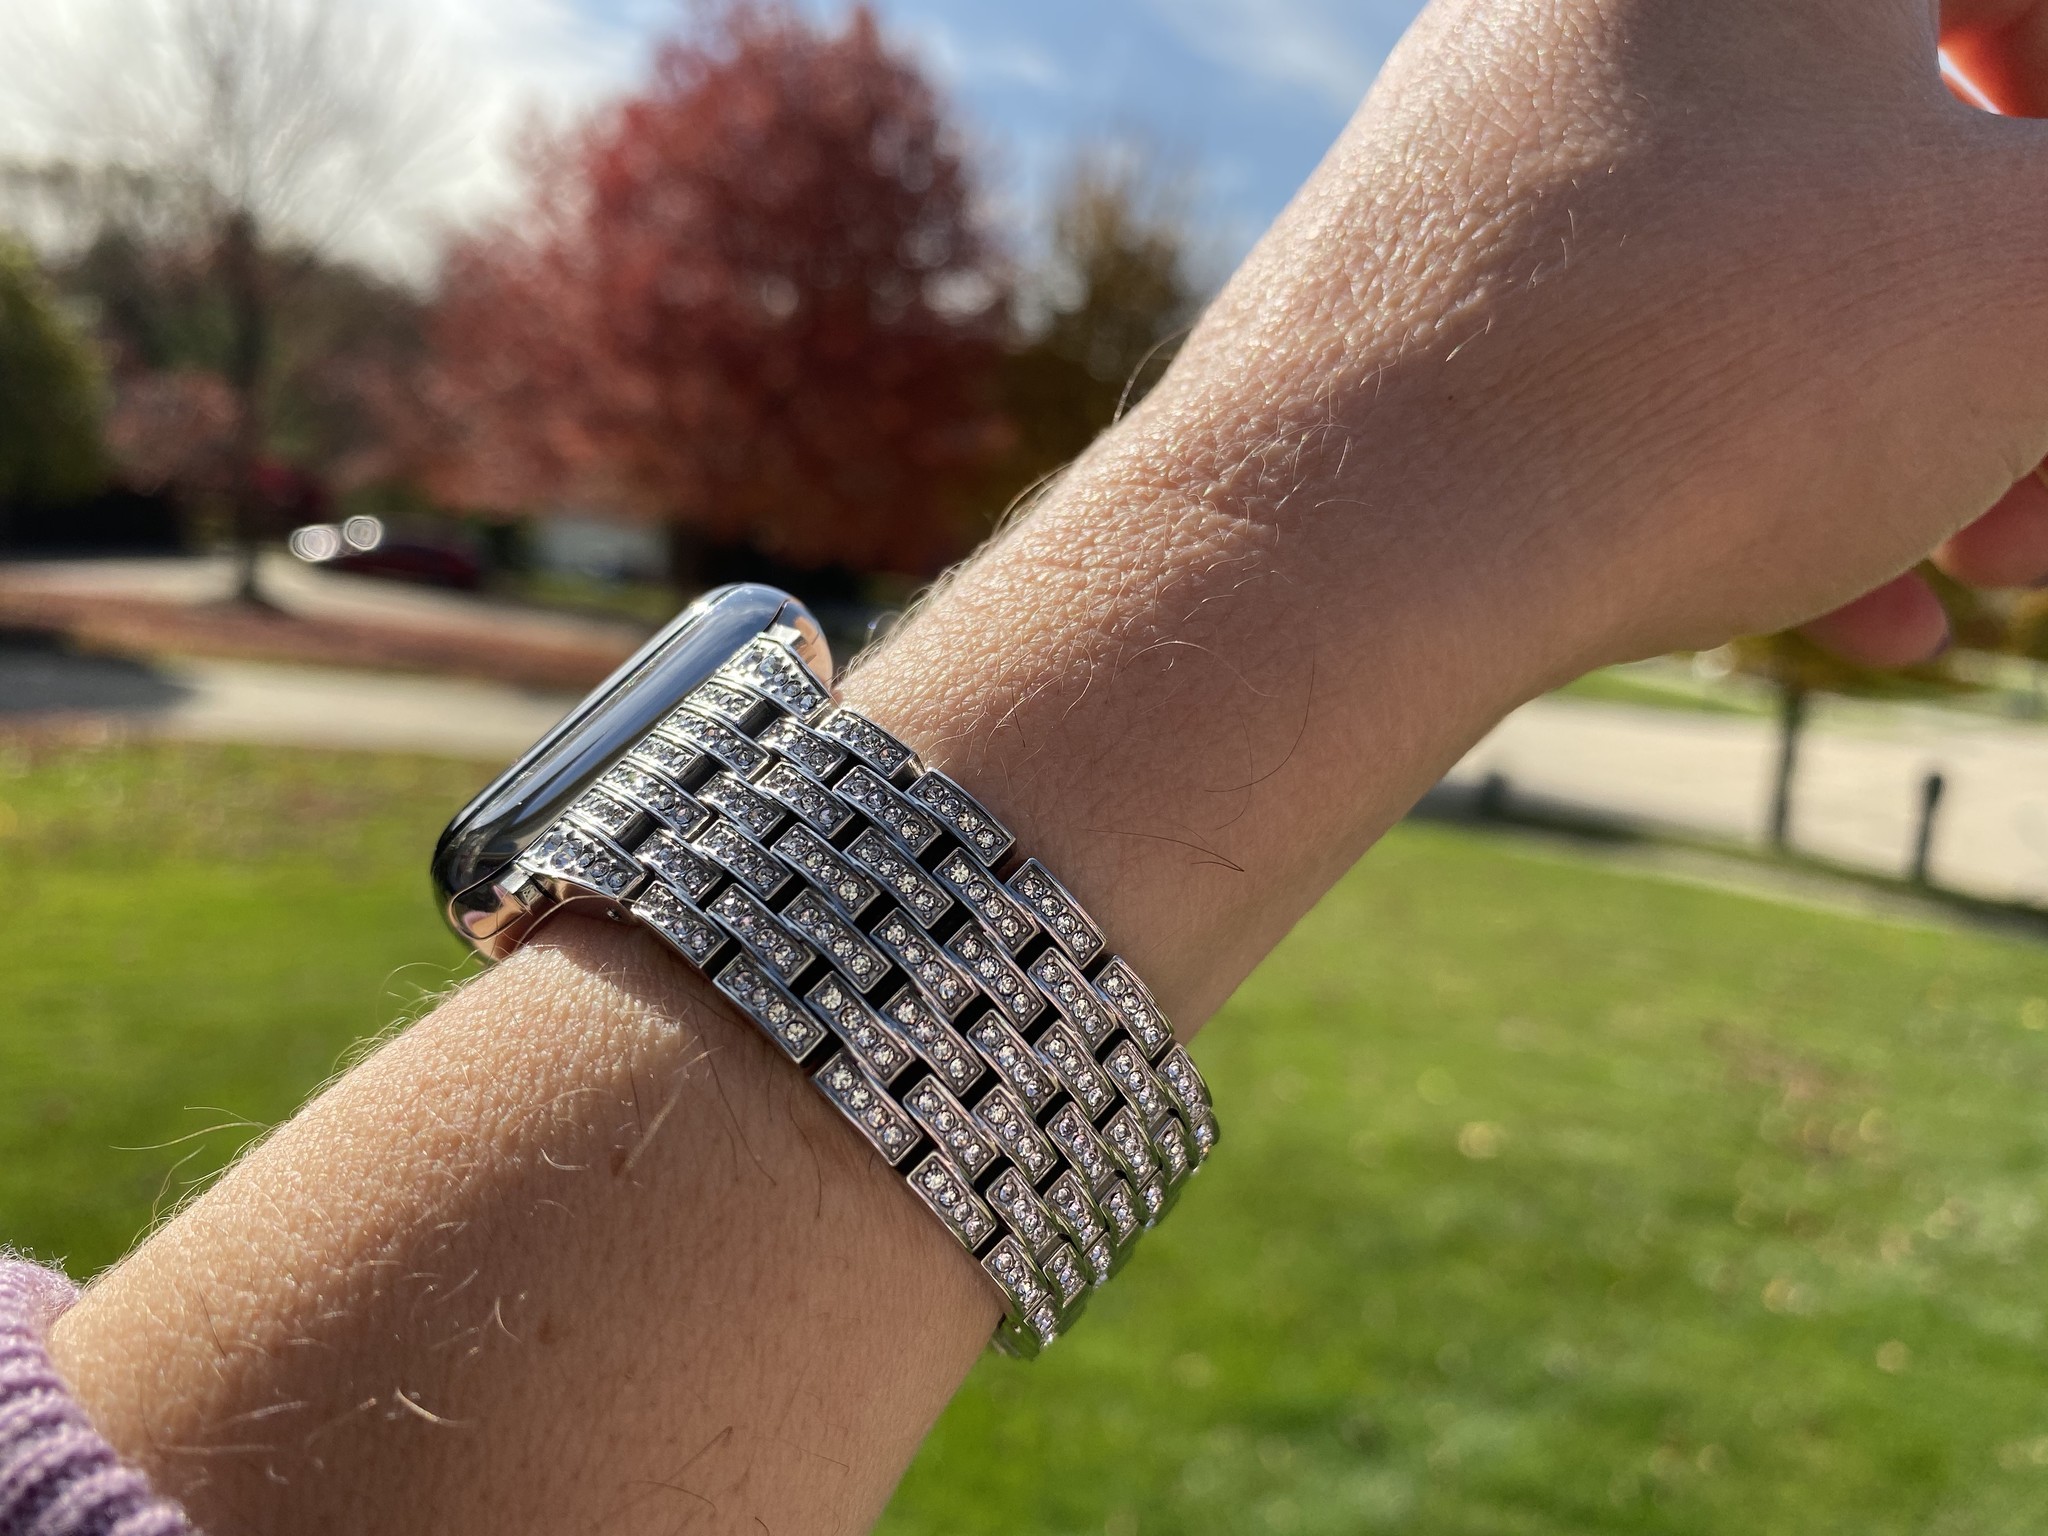 Wearlizer Crystal Rhinestone Apple Watch Band review: Pretty and sparkly  iMore